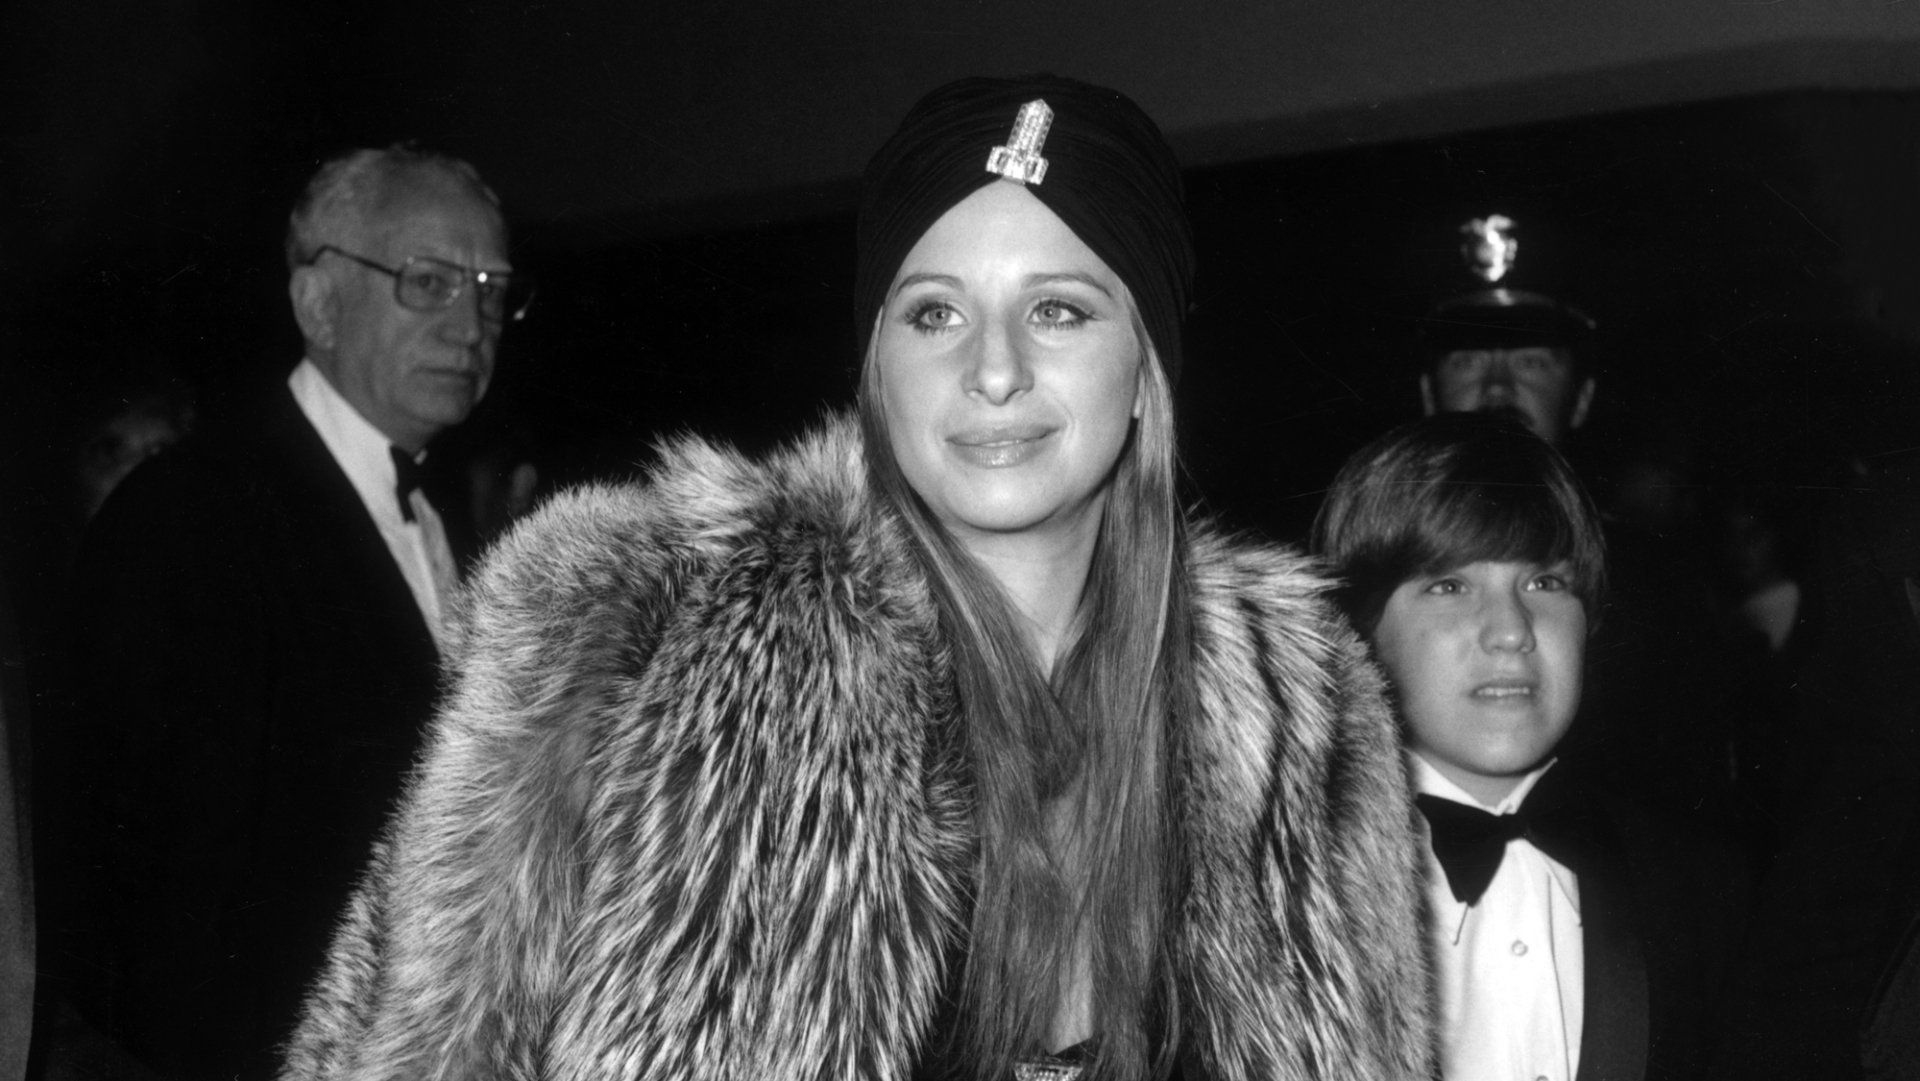 Streisand in grey fur at the premiere of The Way We Were